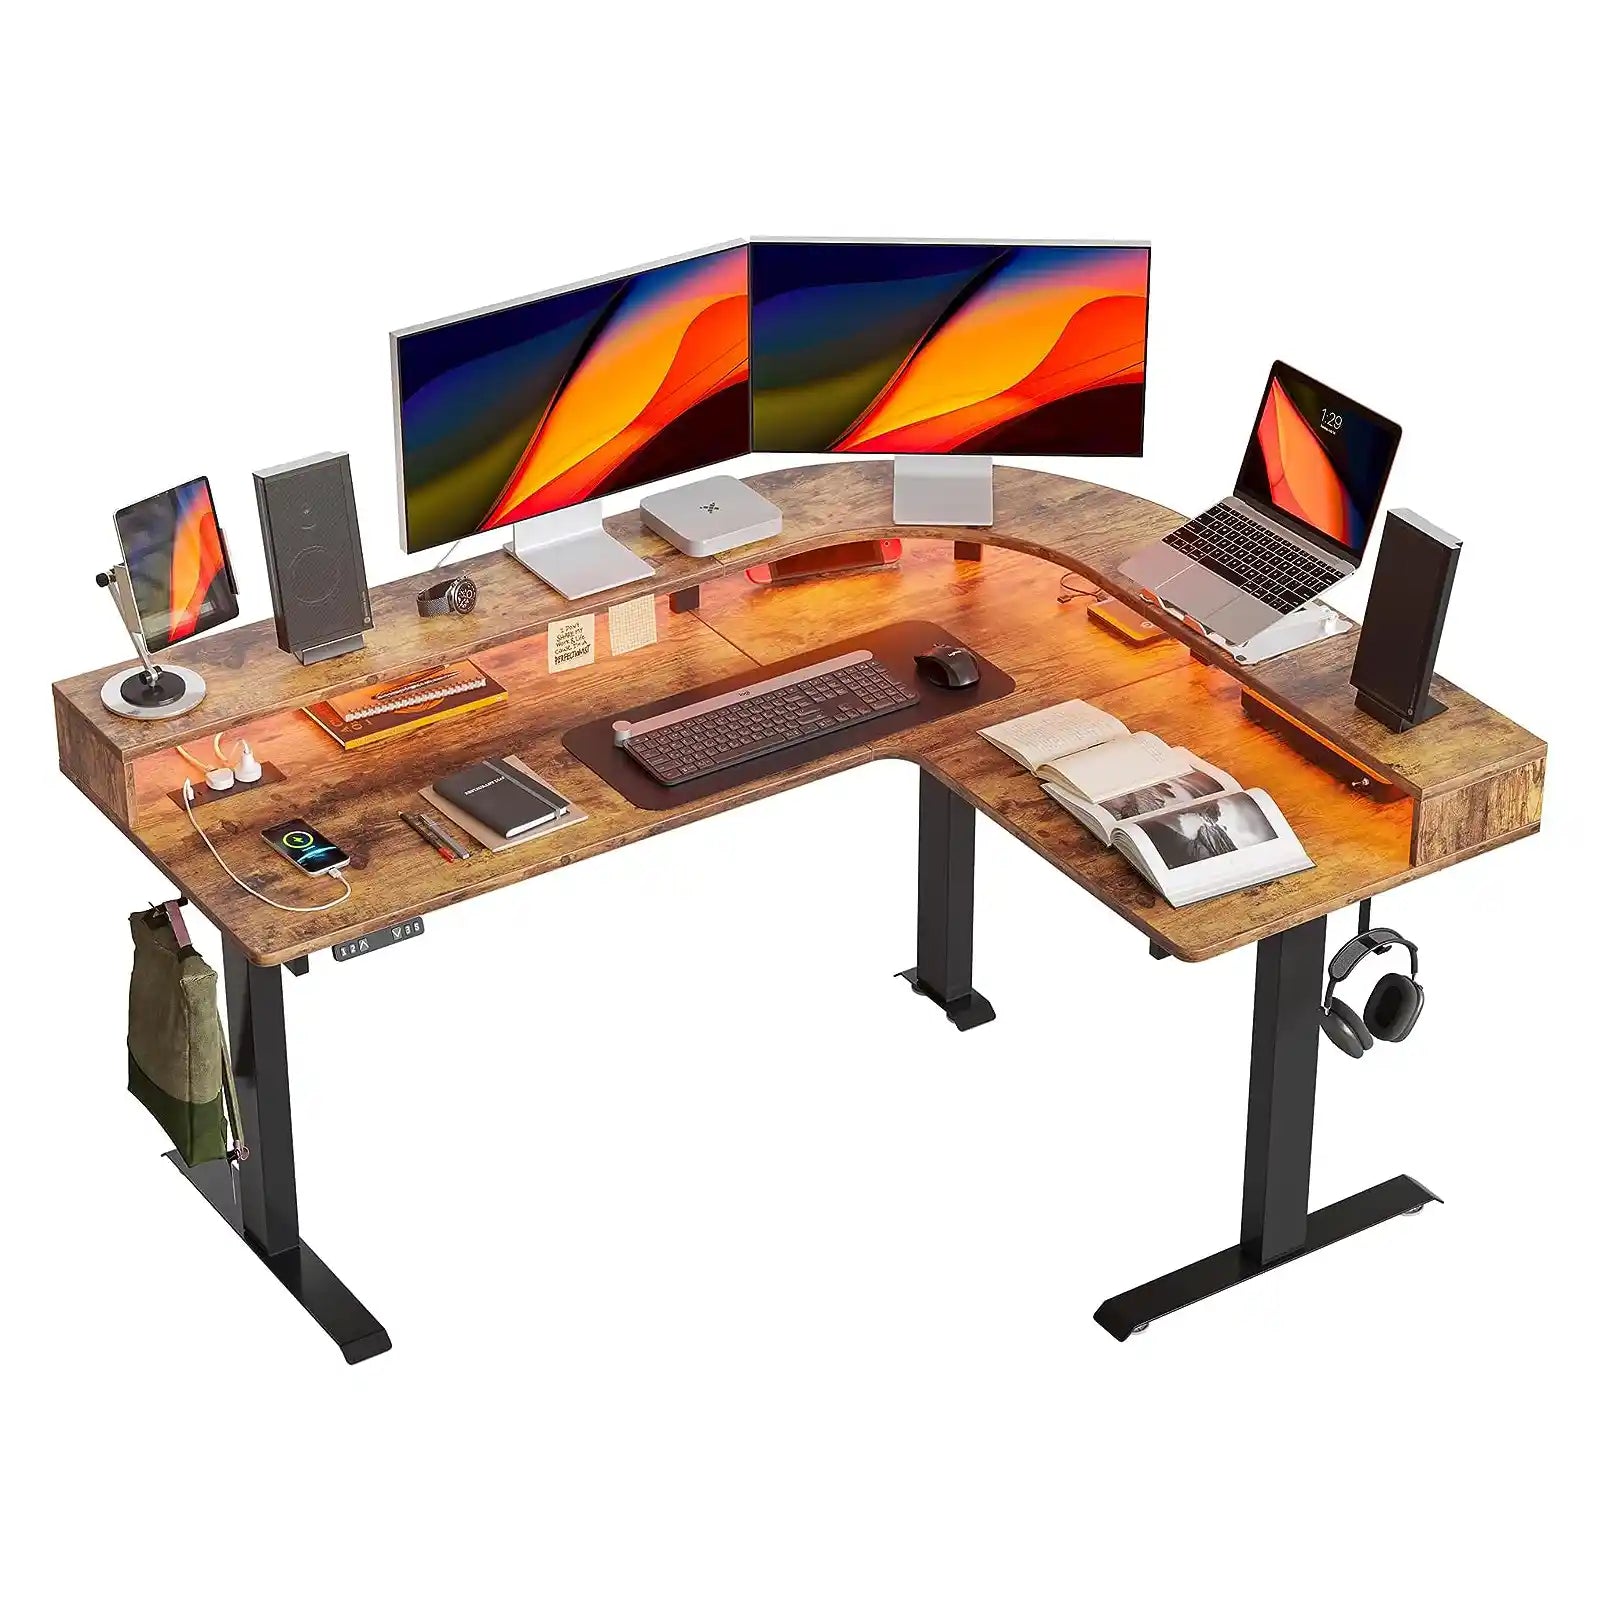 Adjustable L Shaped Standing Desk with LED Strip & Power Outlets，63 inches Height Adjustable Stand up Corner Desk with Ergonomic Monitor Stand